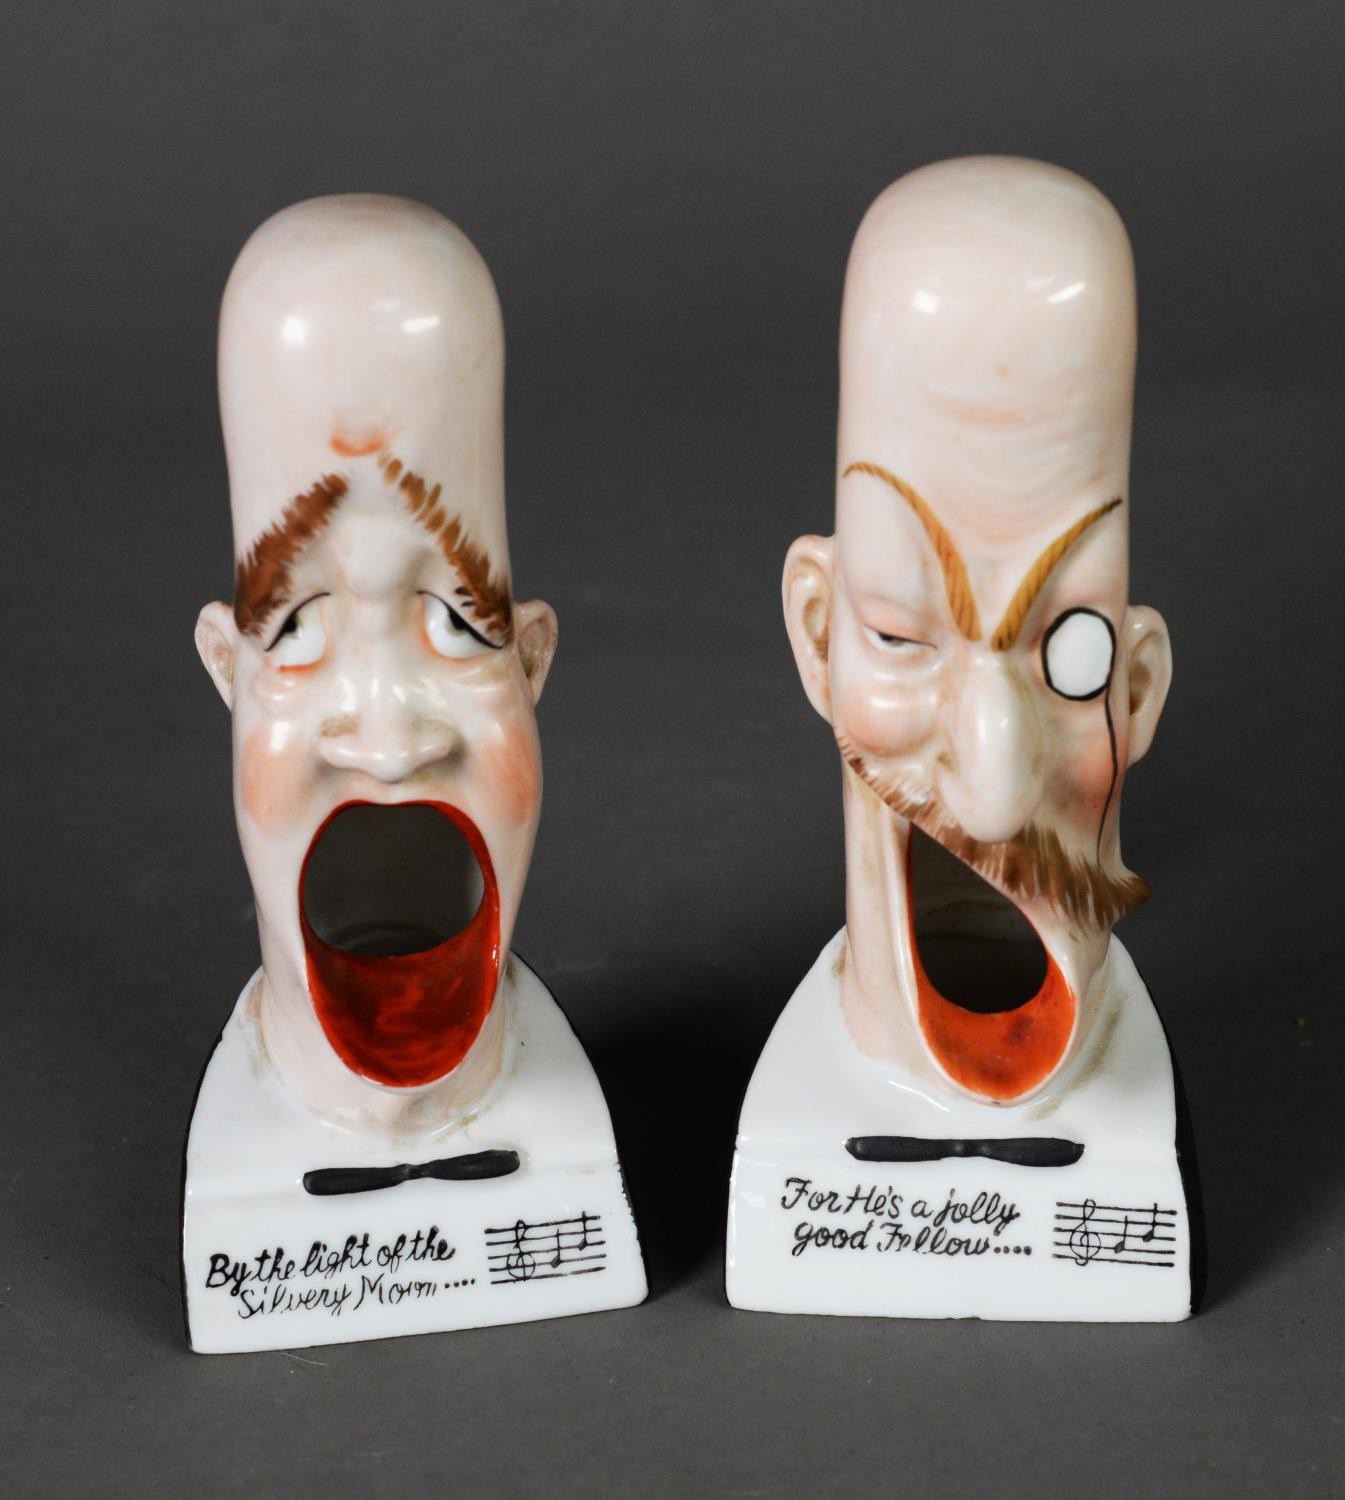 A PAIR OF PORCELAIN SMOKING HEAD ASHTRAYS, by Schafer & Vater; 'For he's a jolly good fellow' and '